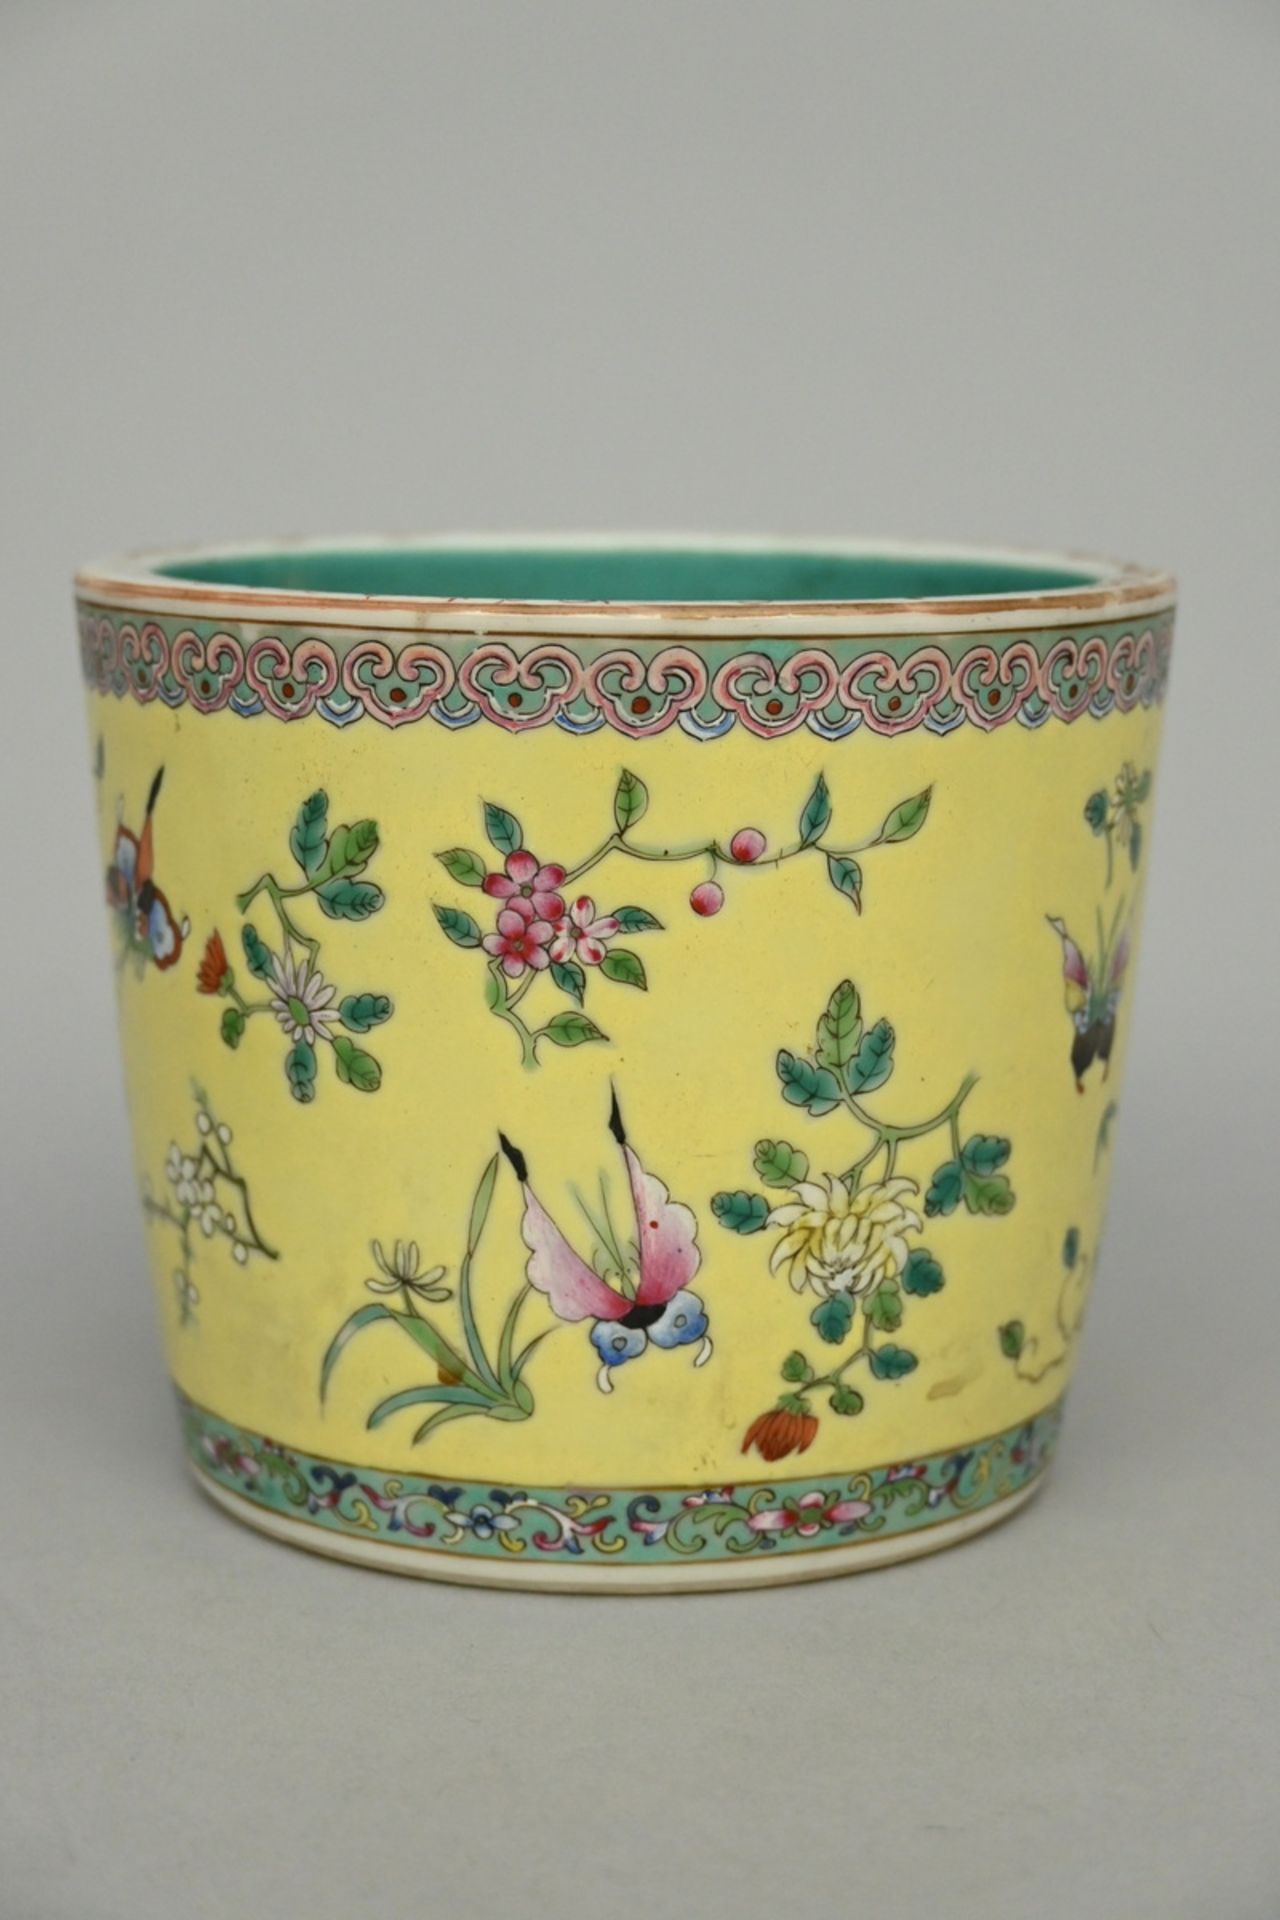 Cachepot famille jaune (h12 dia14cm) and planter in blue and white porcelain (6x24x19cm) - Image 2 of 5